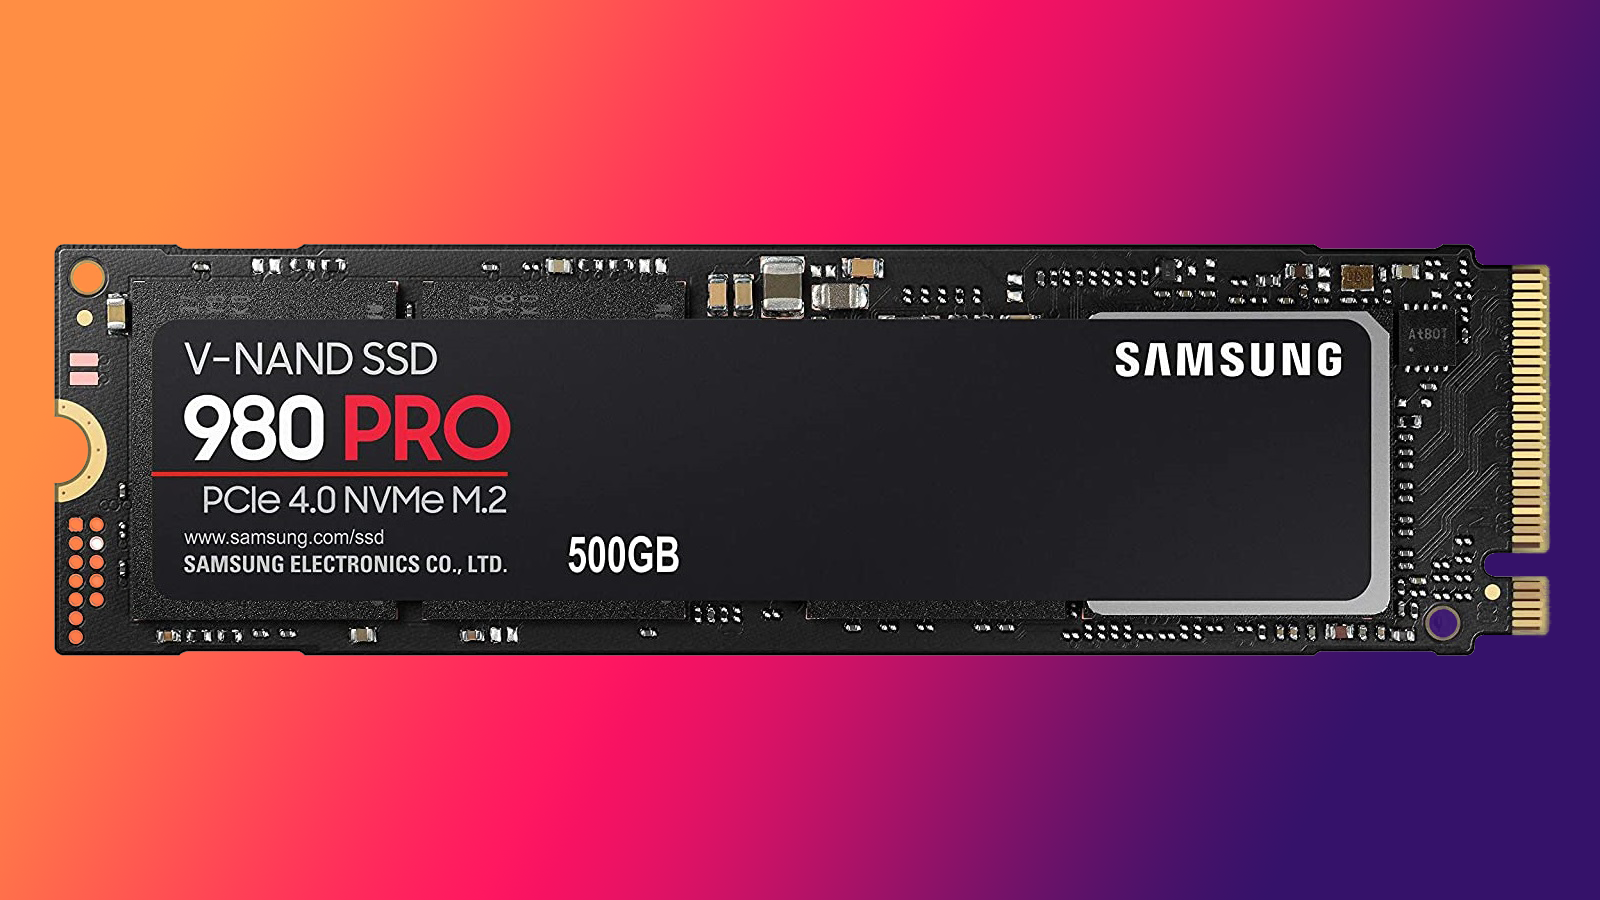 Potatoes Minimize Grant Samsung 980 Pro, Fastest NVMe SSD, Now $119 for 500GB | Tom's Hardware